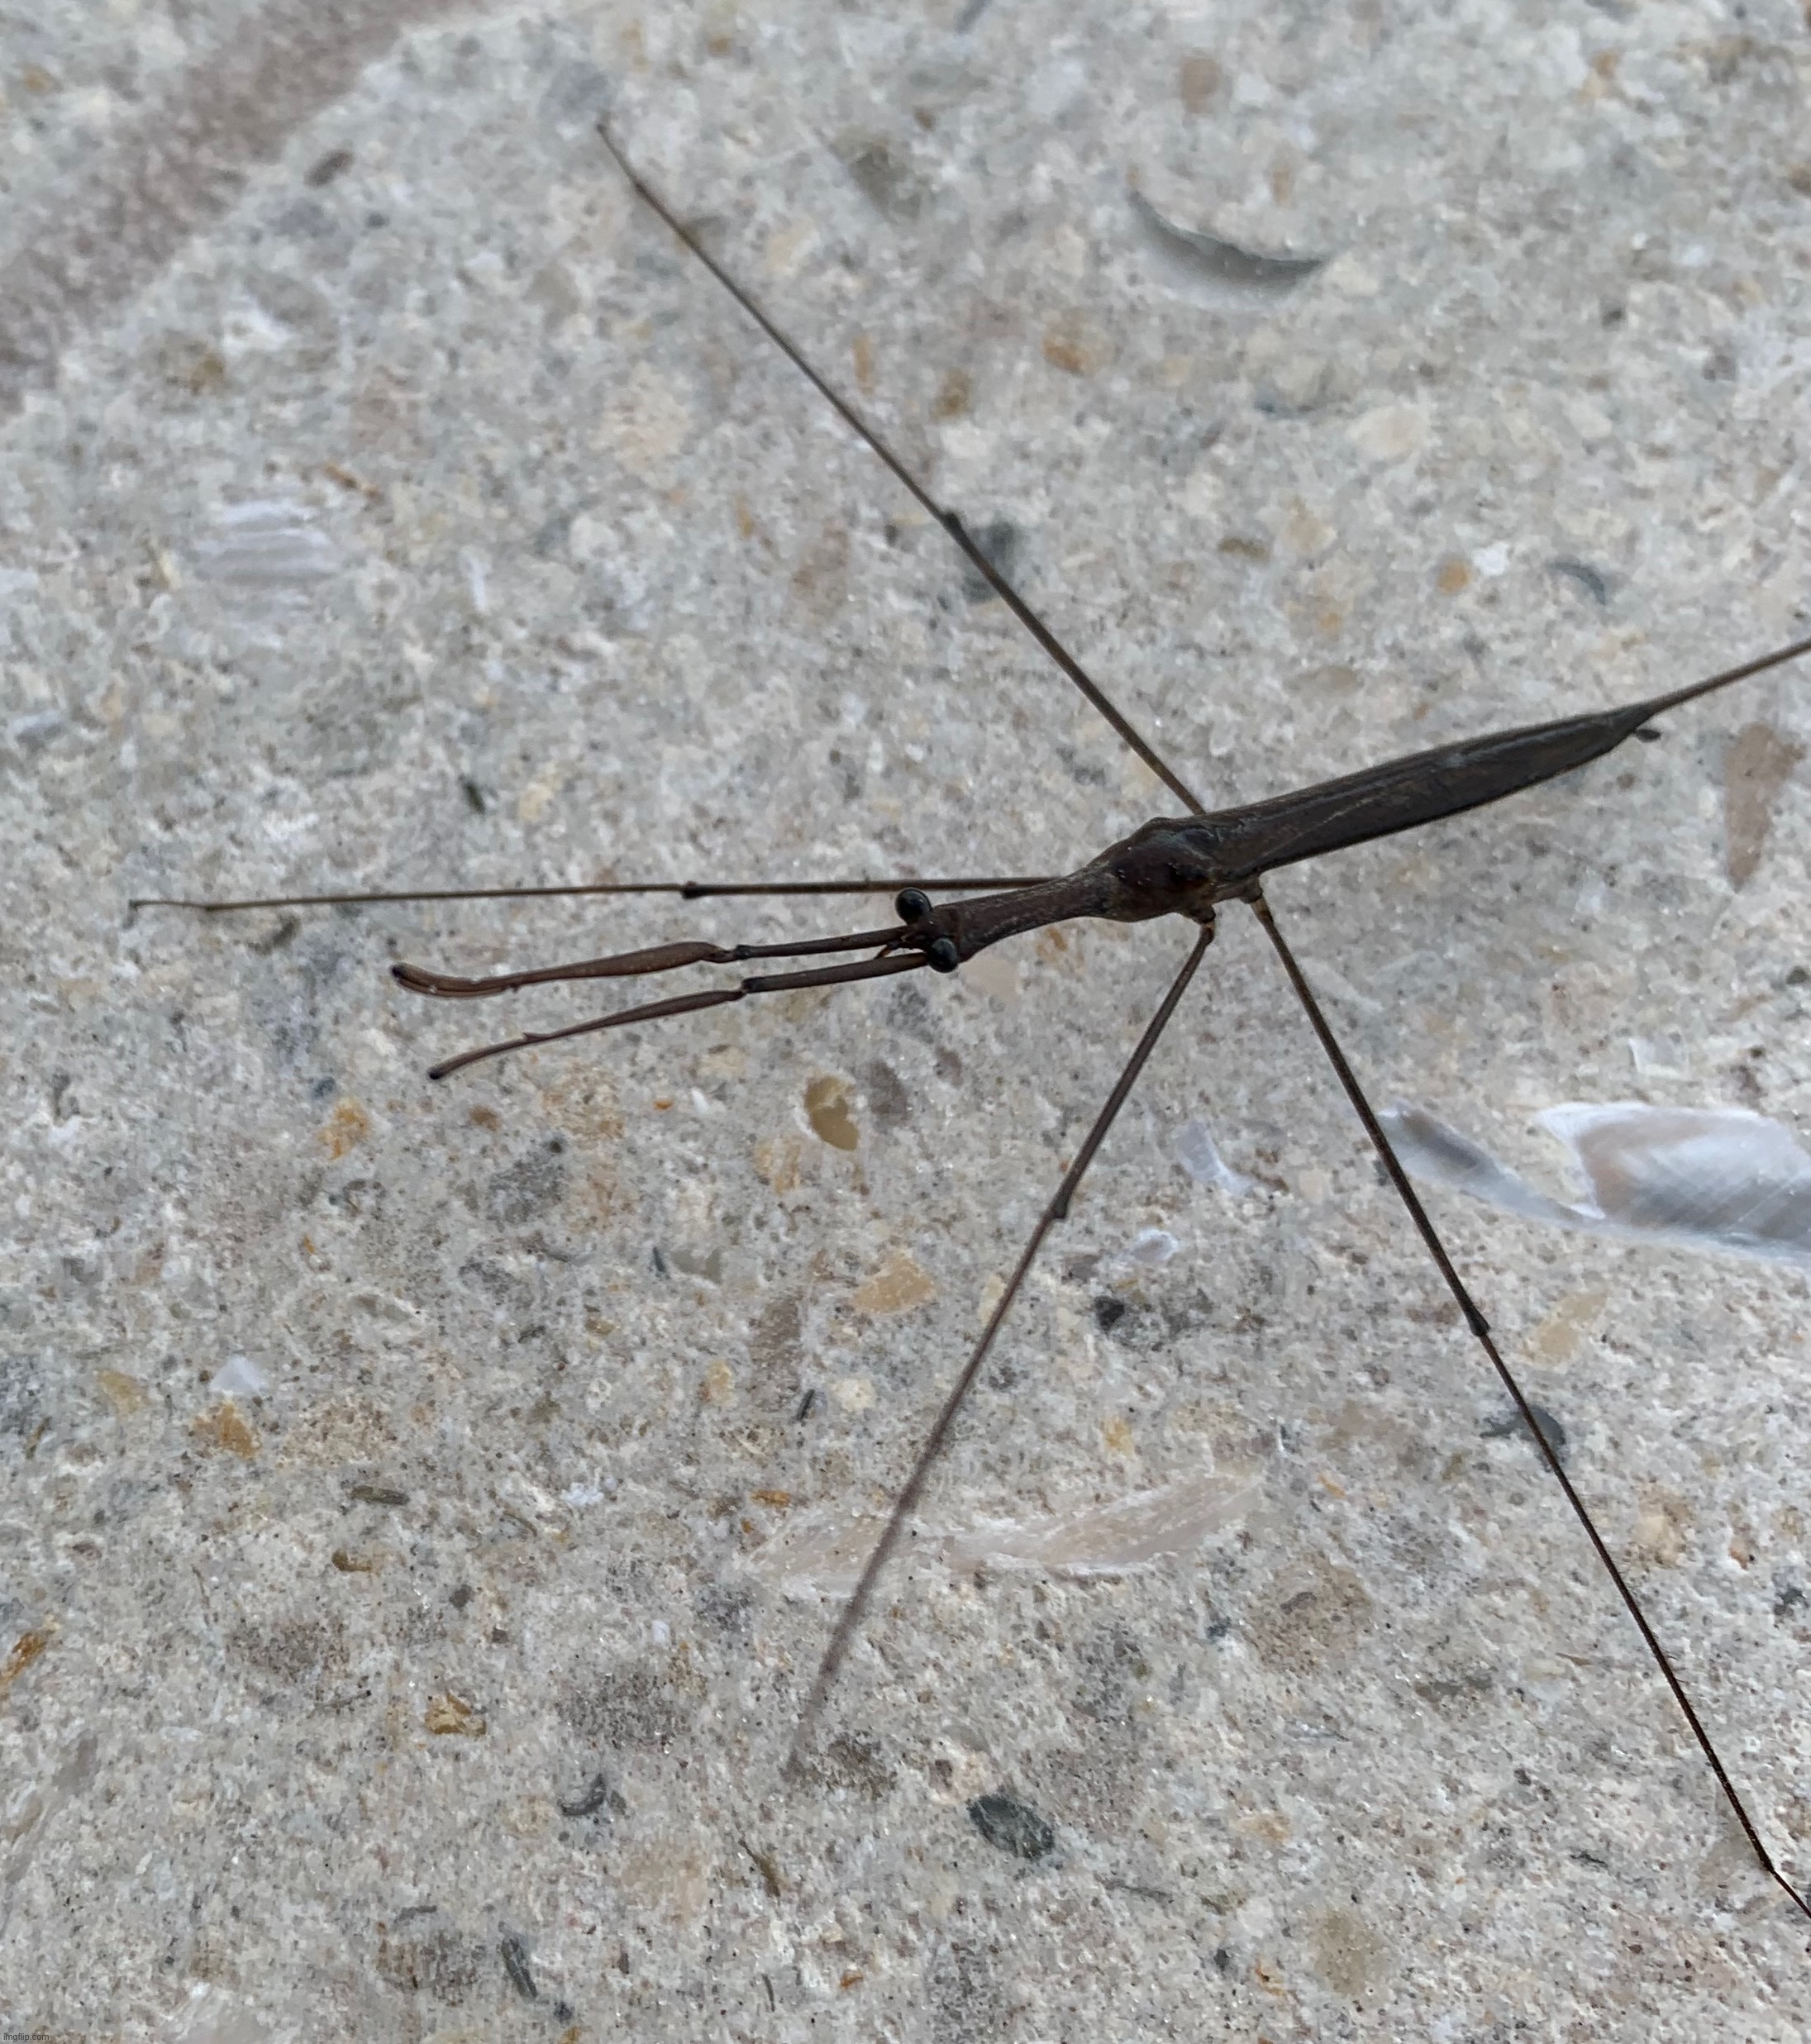 Giant water bug/water stick insect | image tagged in bugs | made w/ Imgflip meme maker